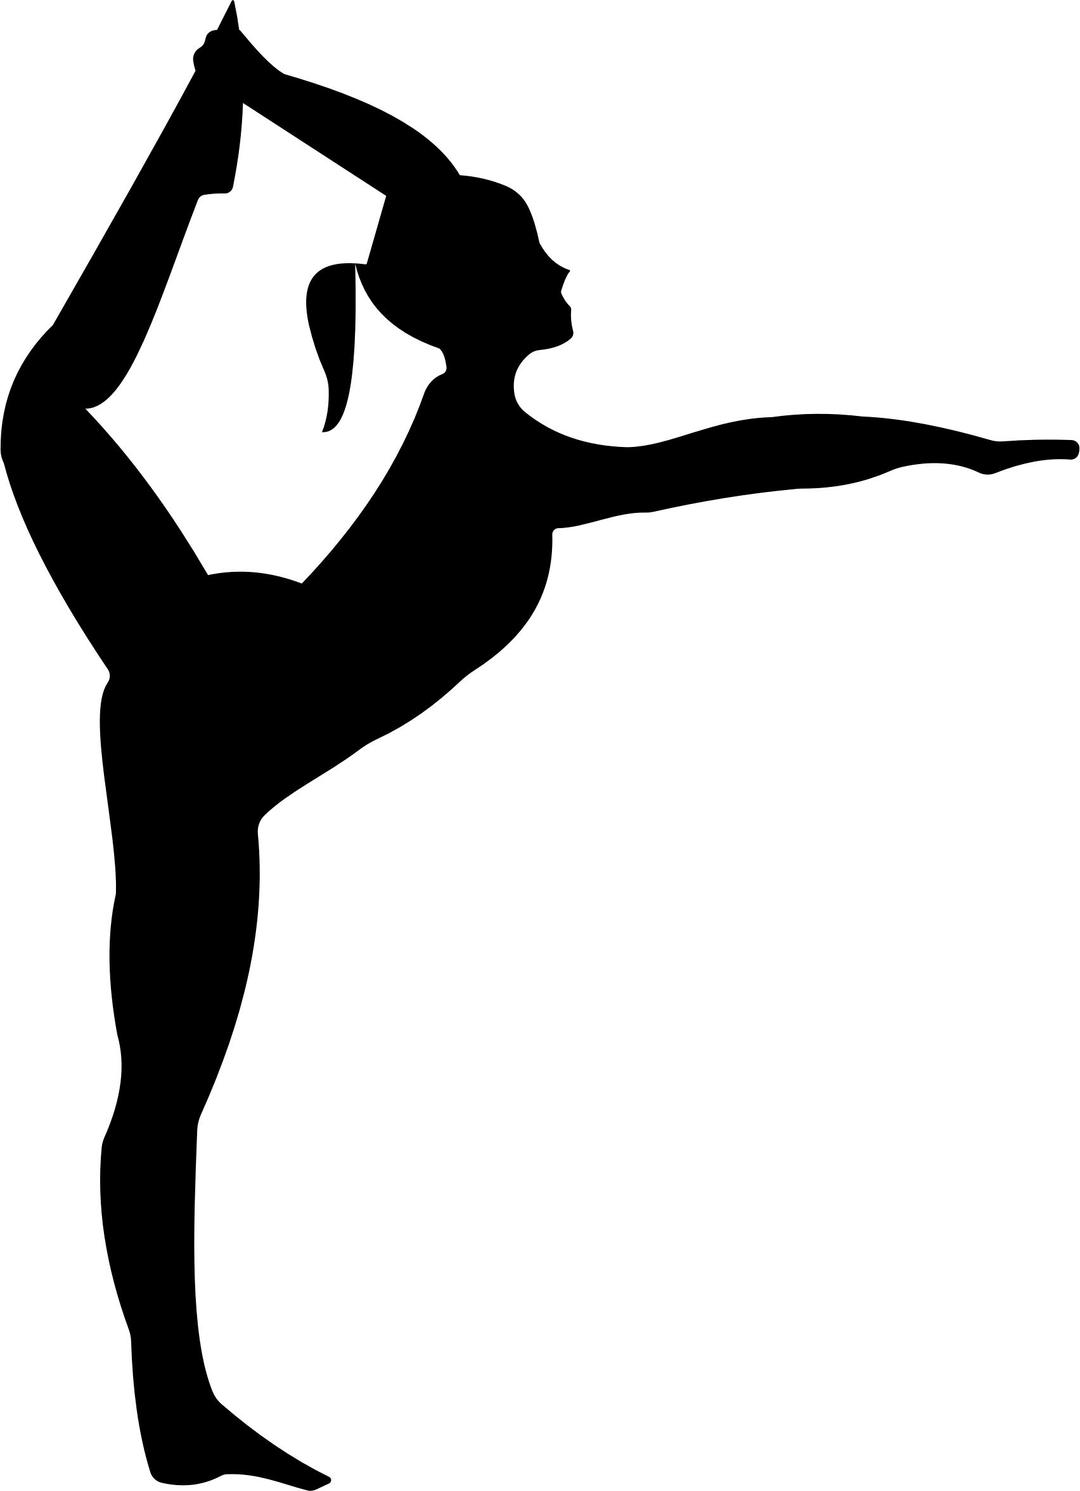 Stretching Ballerina Silhouette png transparent